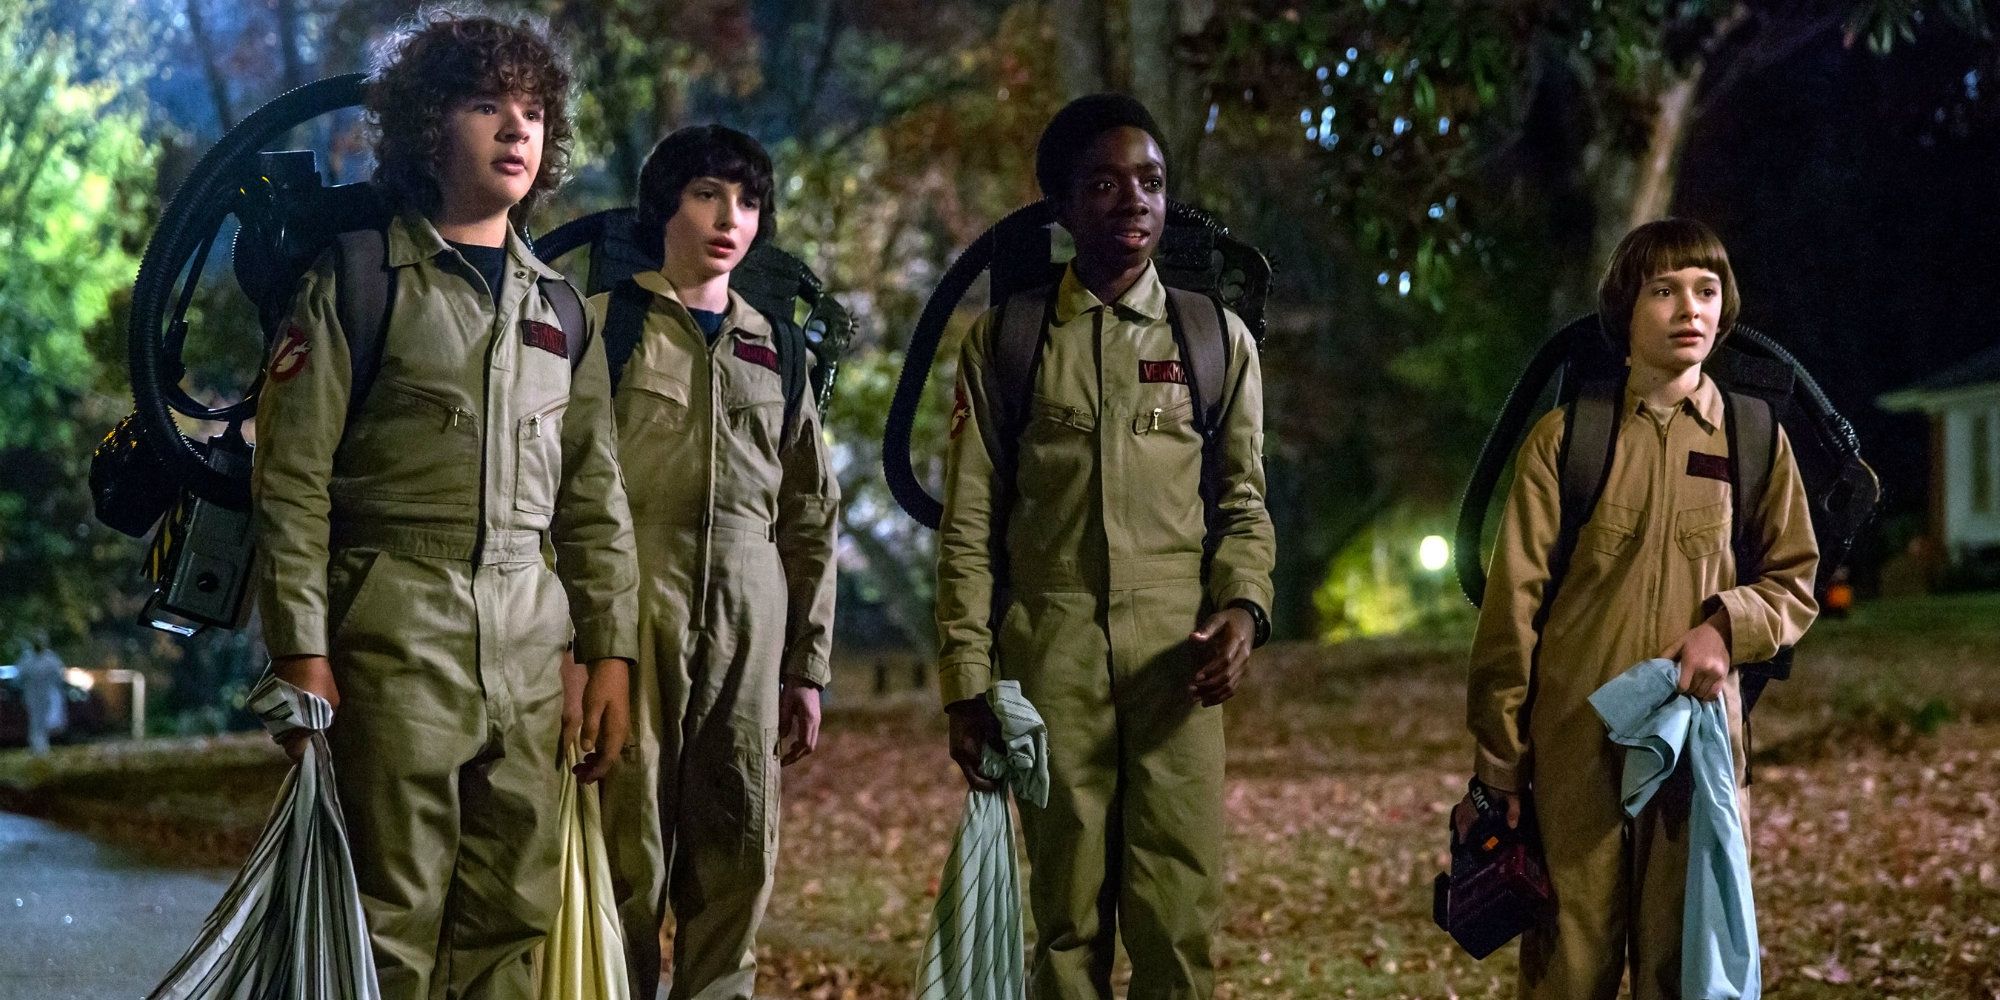 The Stranger Things kids in Ghostbusters costumes